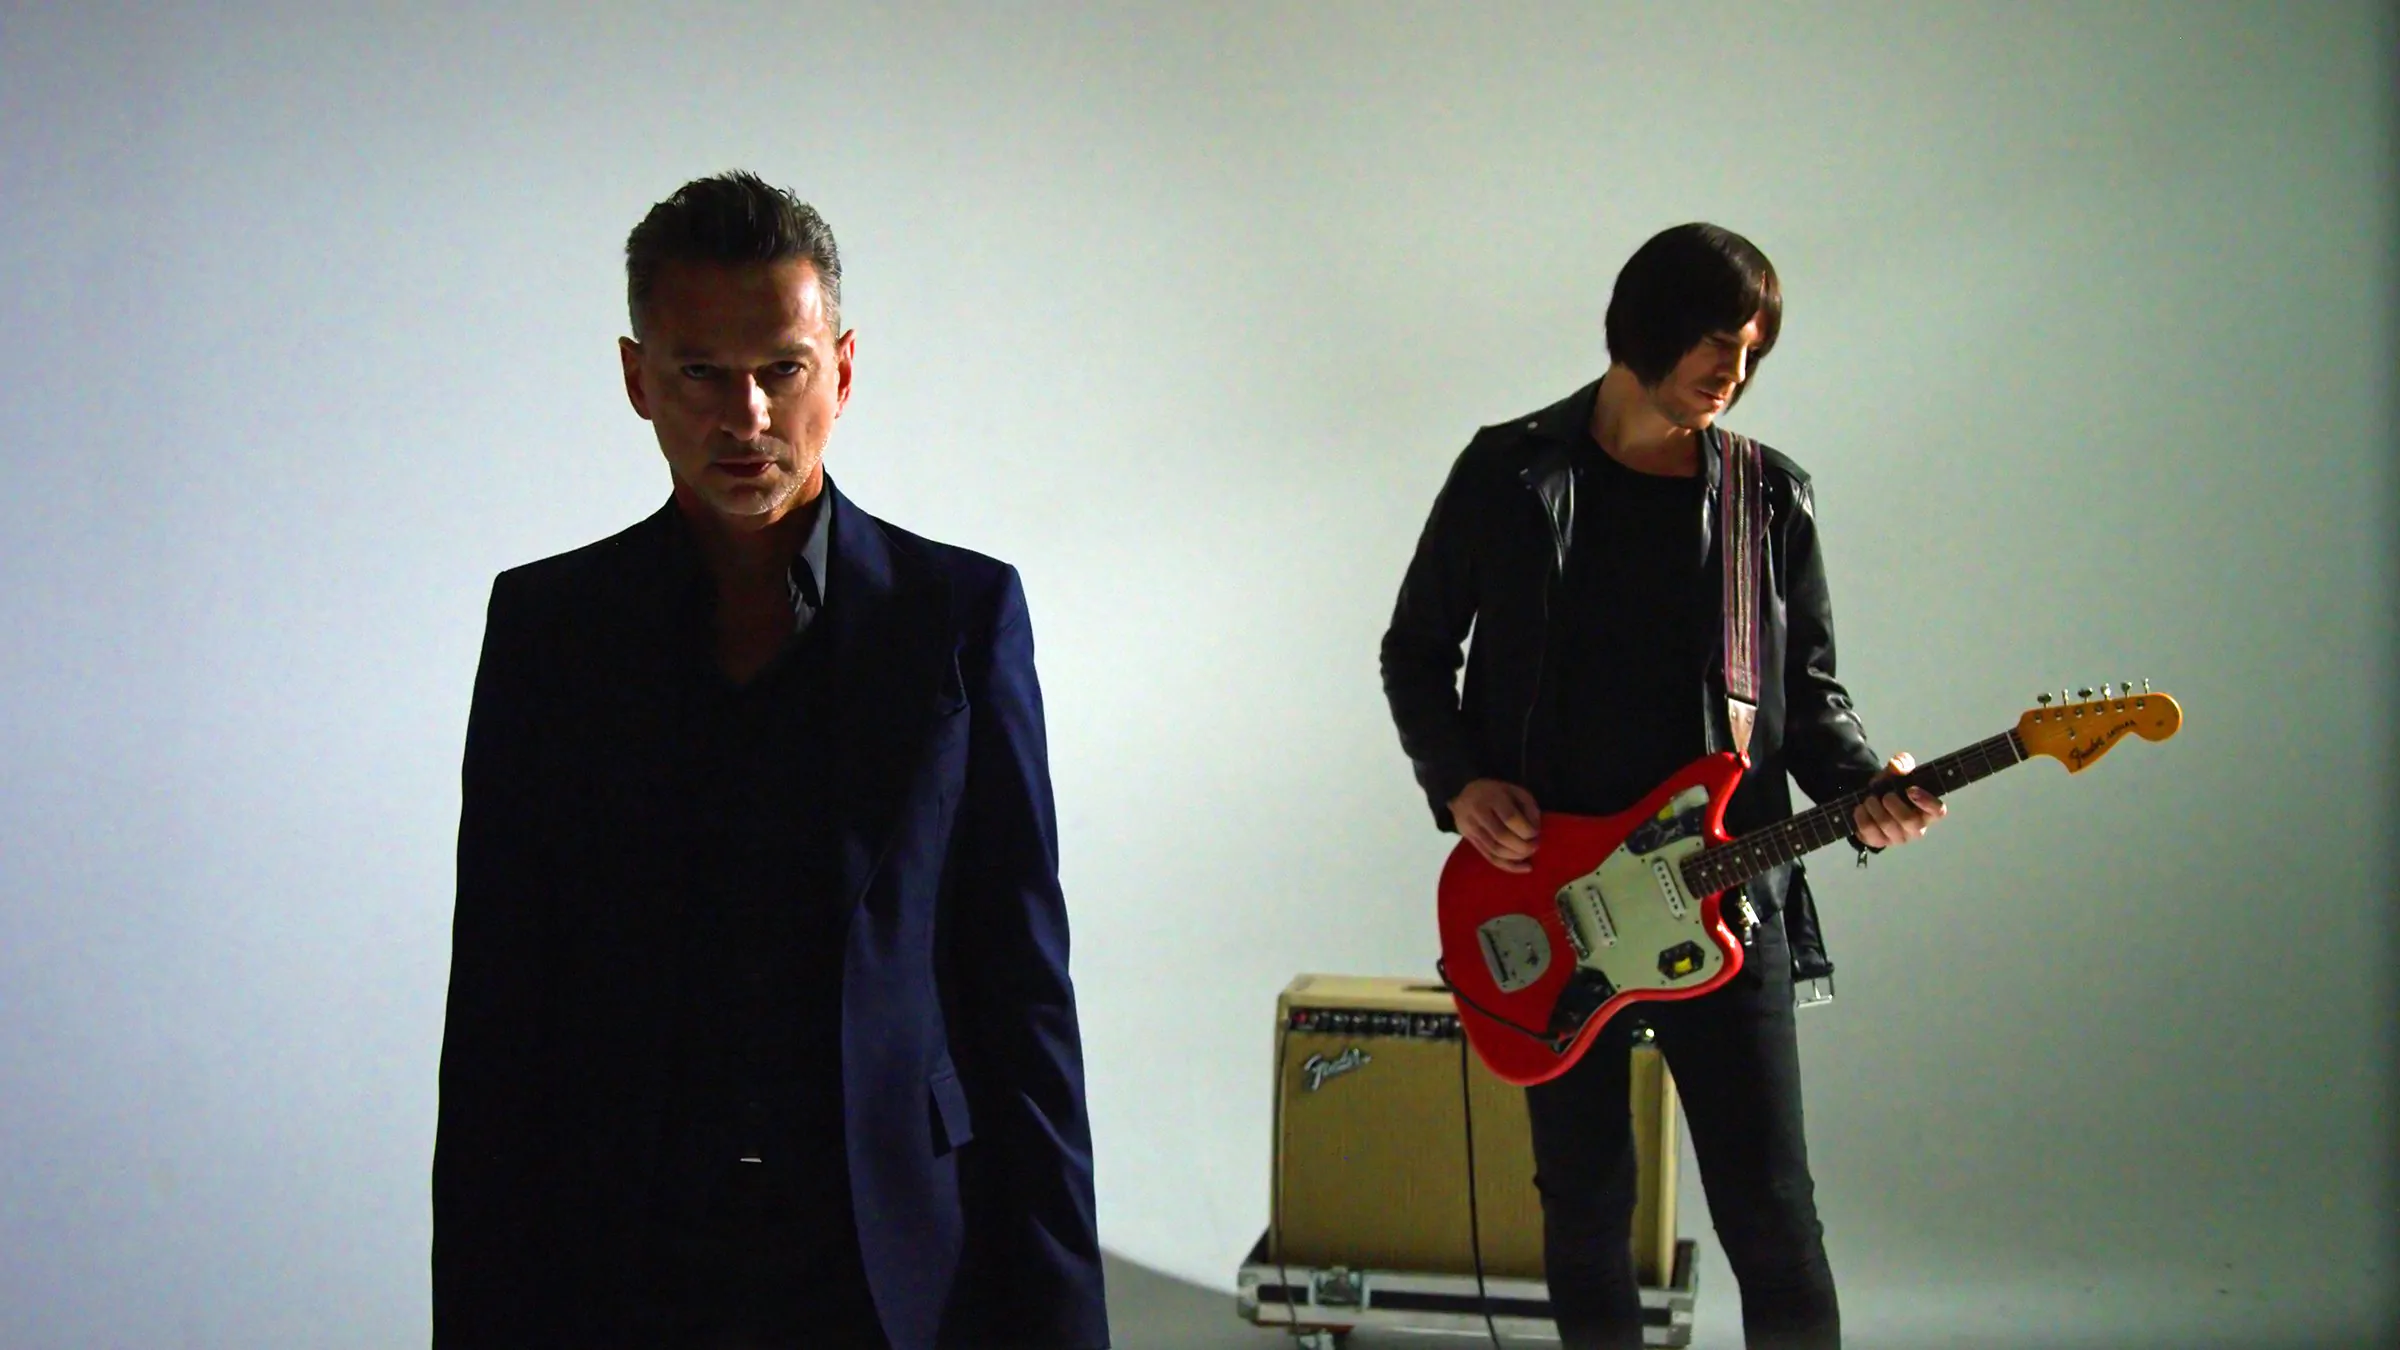 Depeche Mode’s DAVE GAHAN joins HUMANIST for new single ‘Shock Collar’ – Watch Video